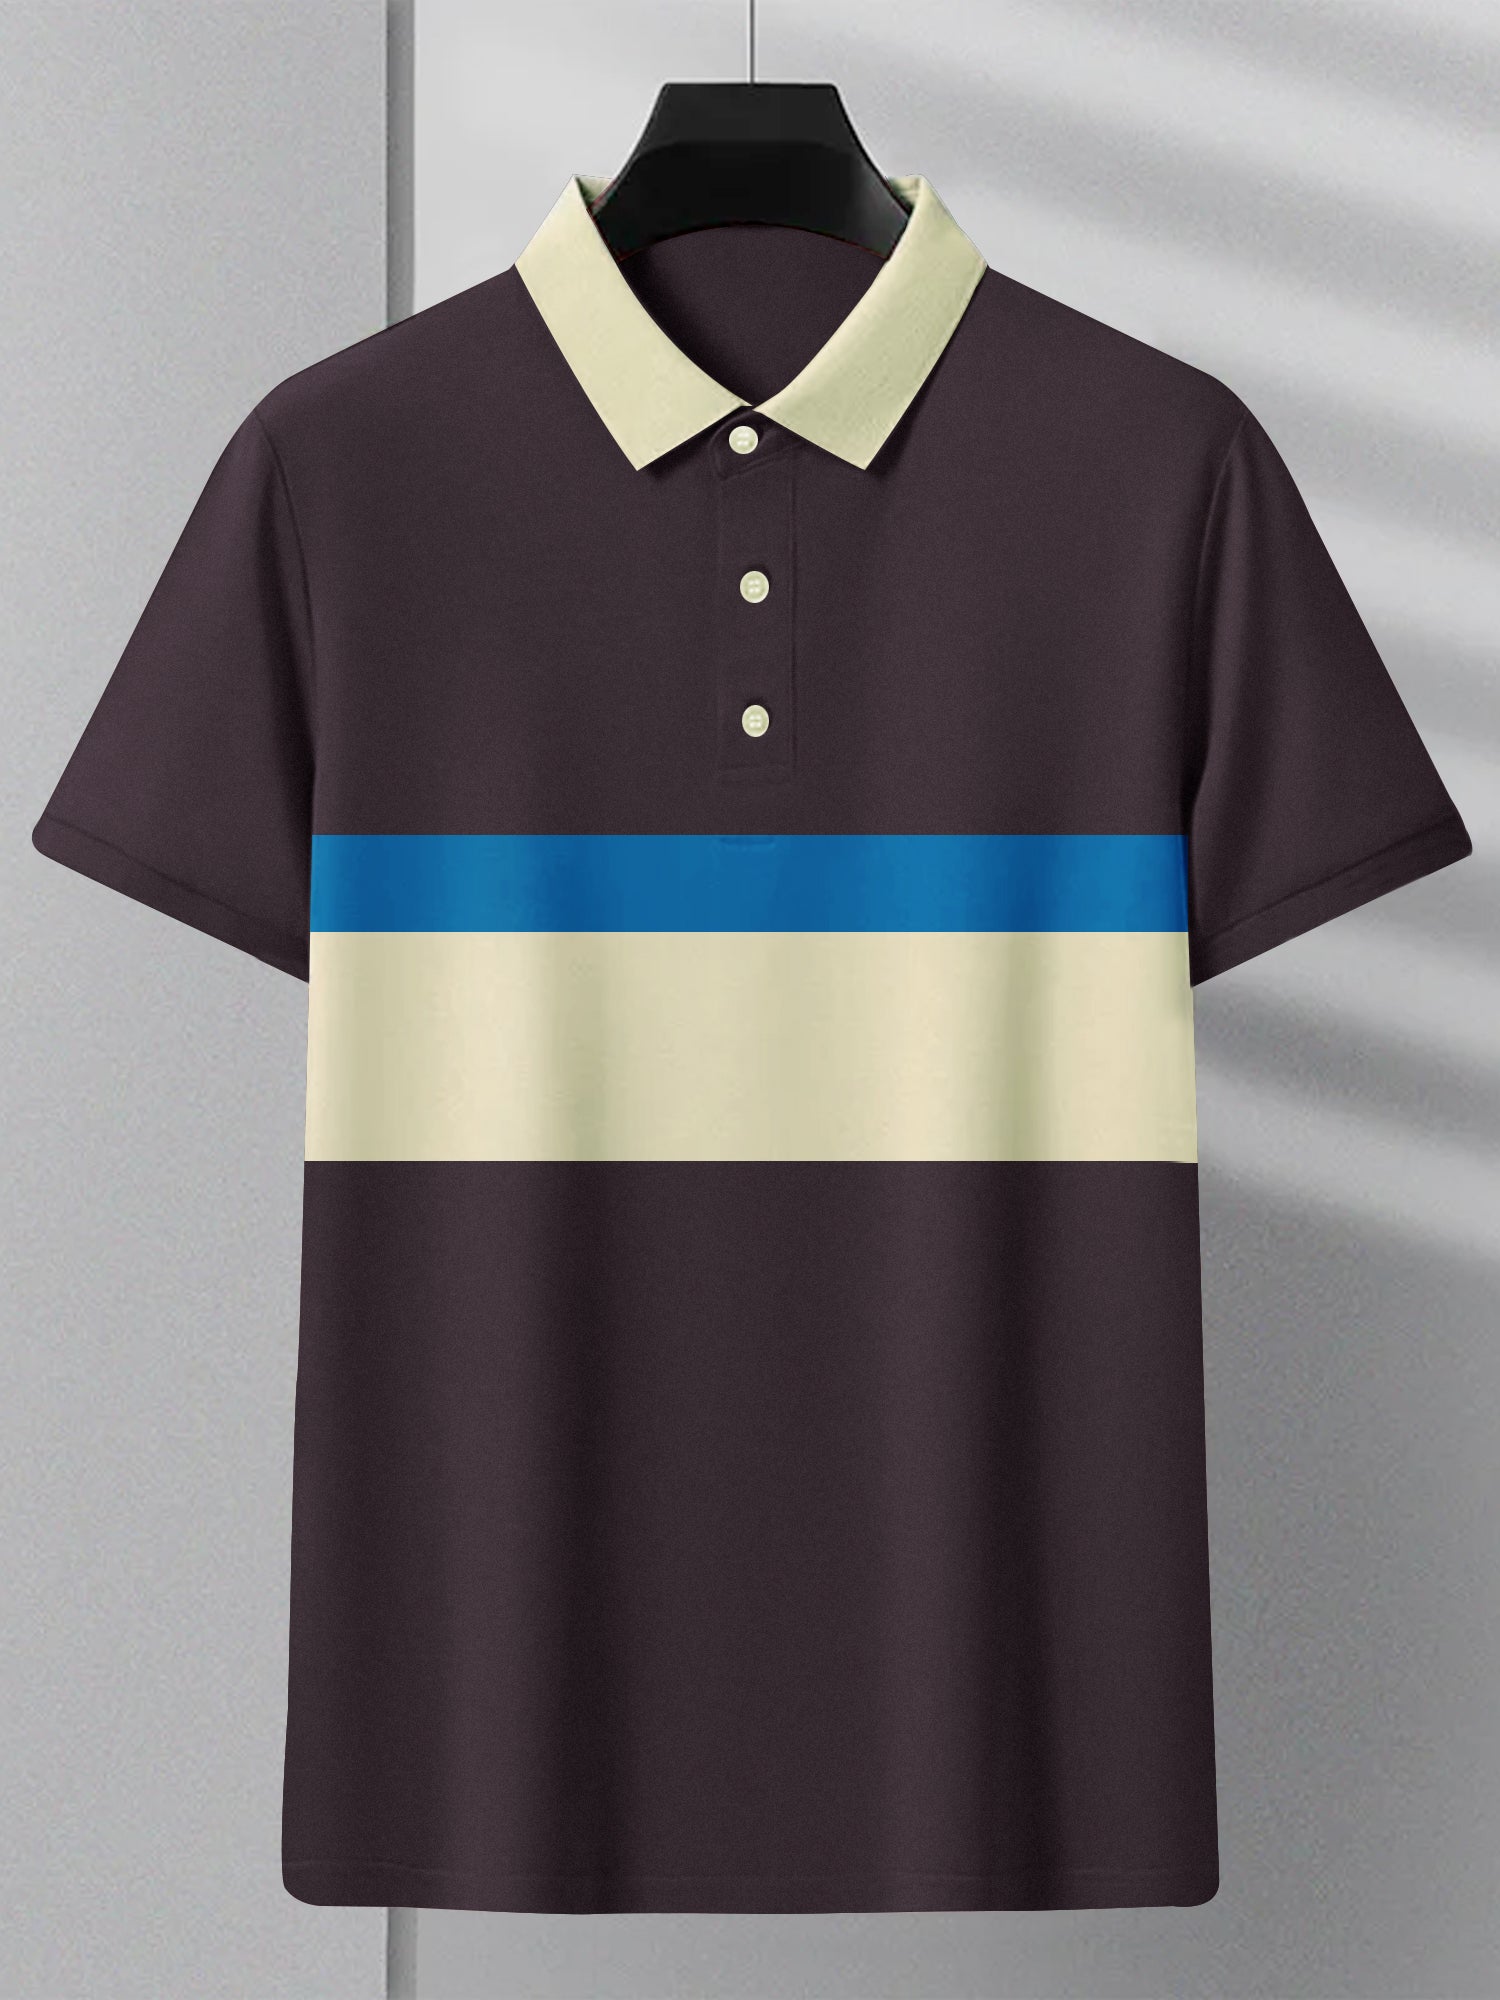 NXT Summer Polo Shirt For Men-Indigo With Off White & Blue Stripe-SP1443/RT2331